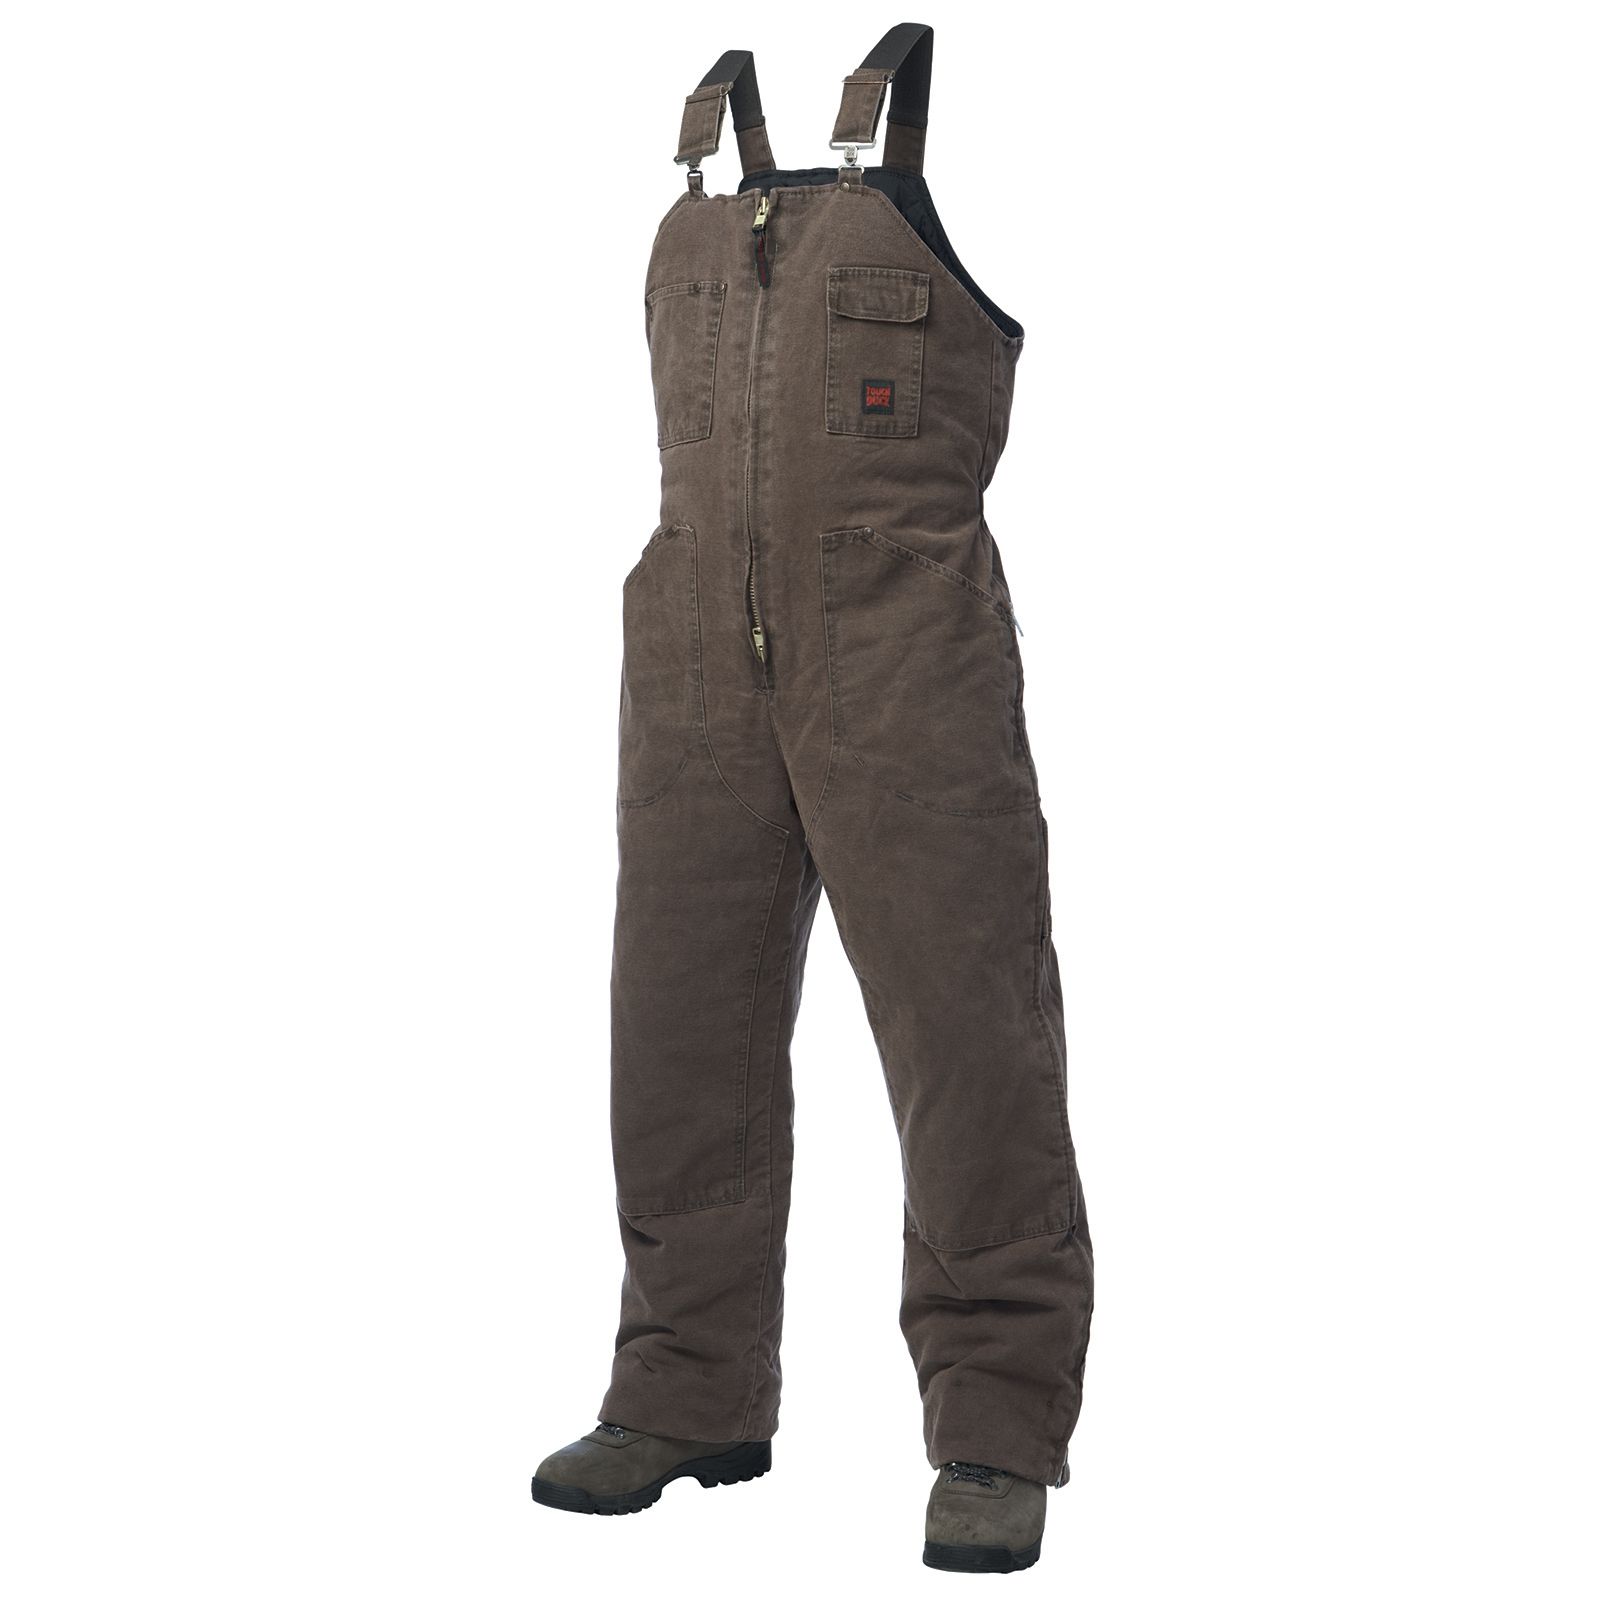 Tough Duck Men's Washed Insulated bib Overall